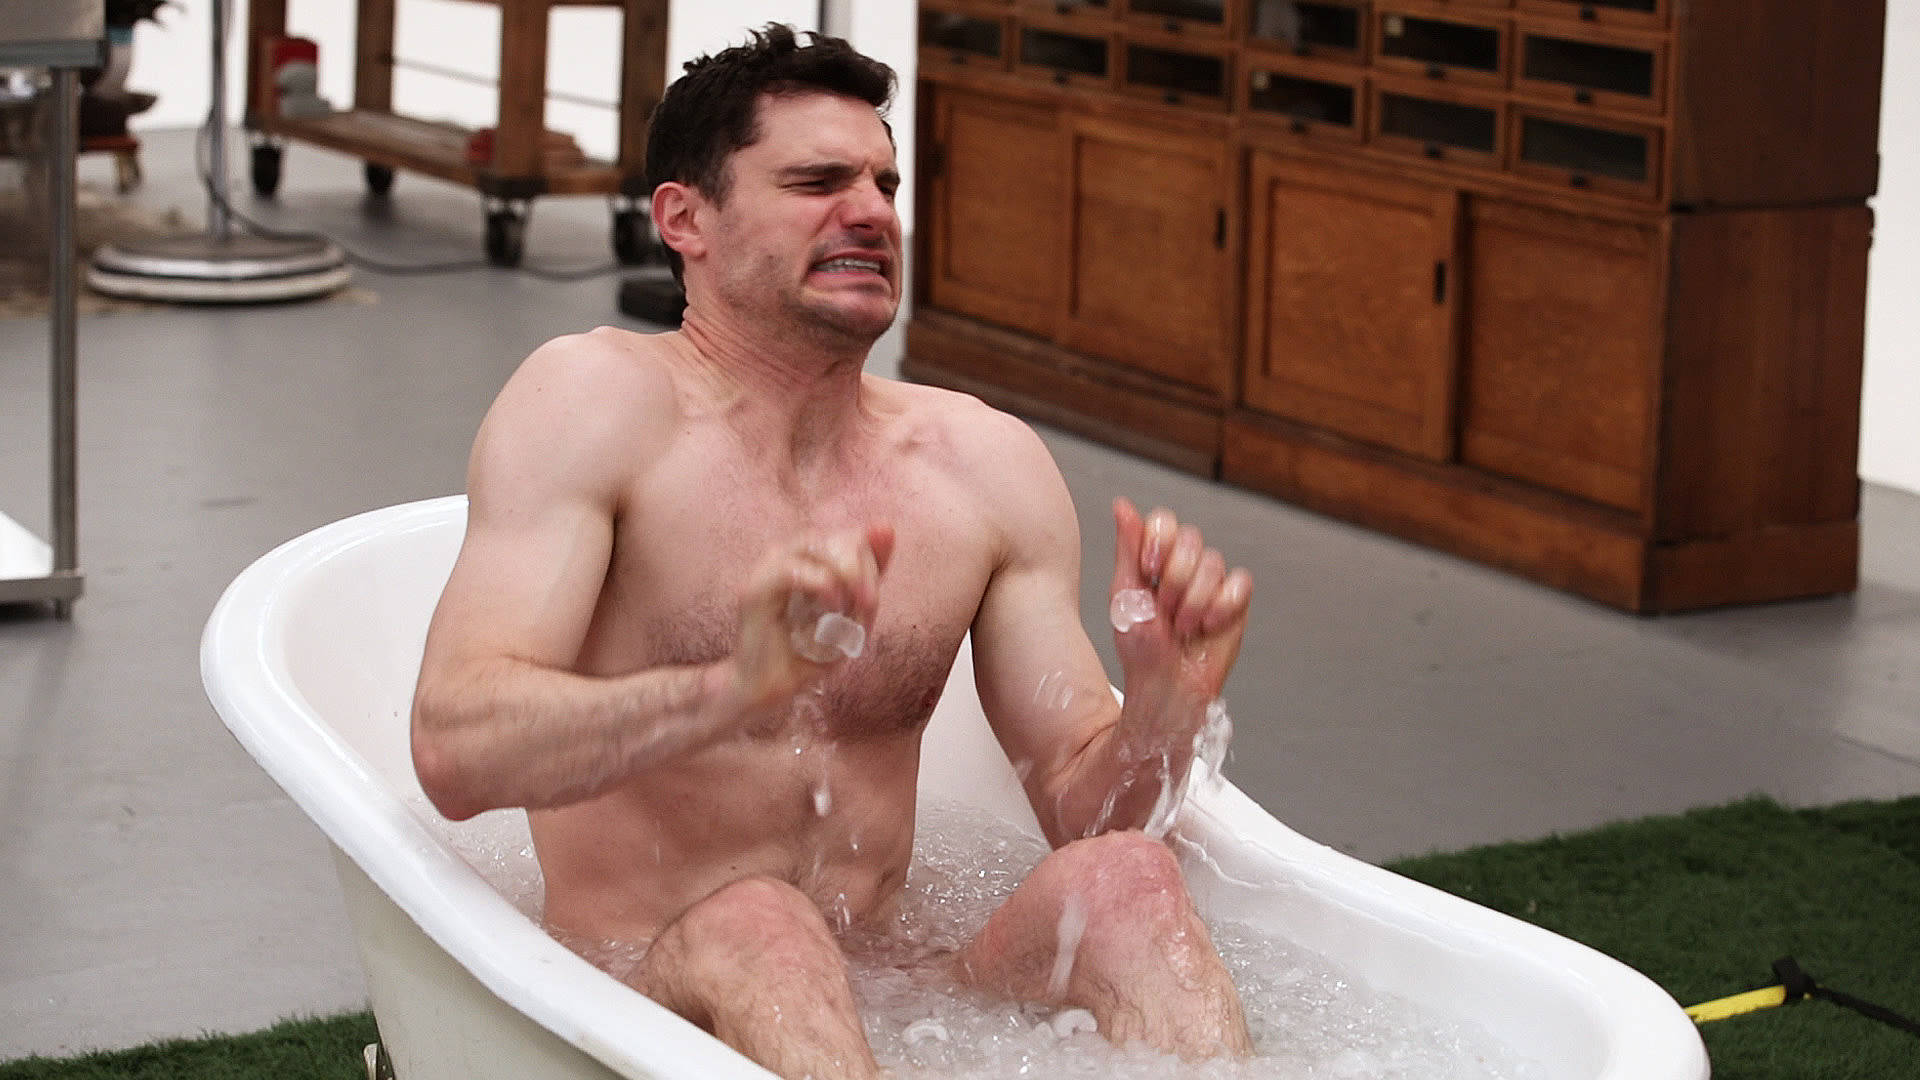 YouTube star Flula Borg had one too many drinks last night and he'...